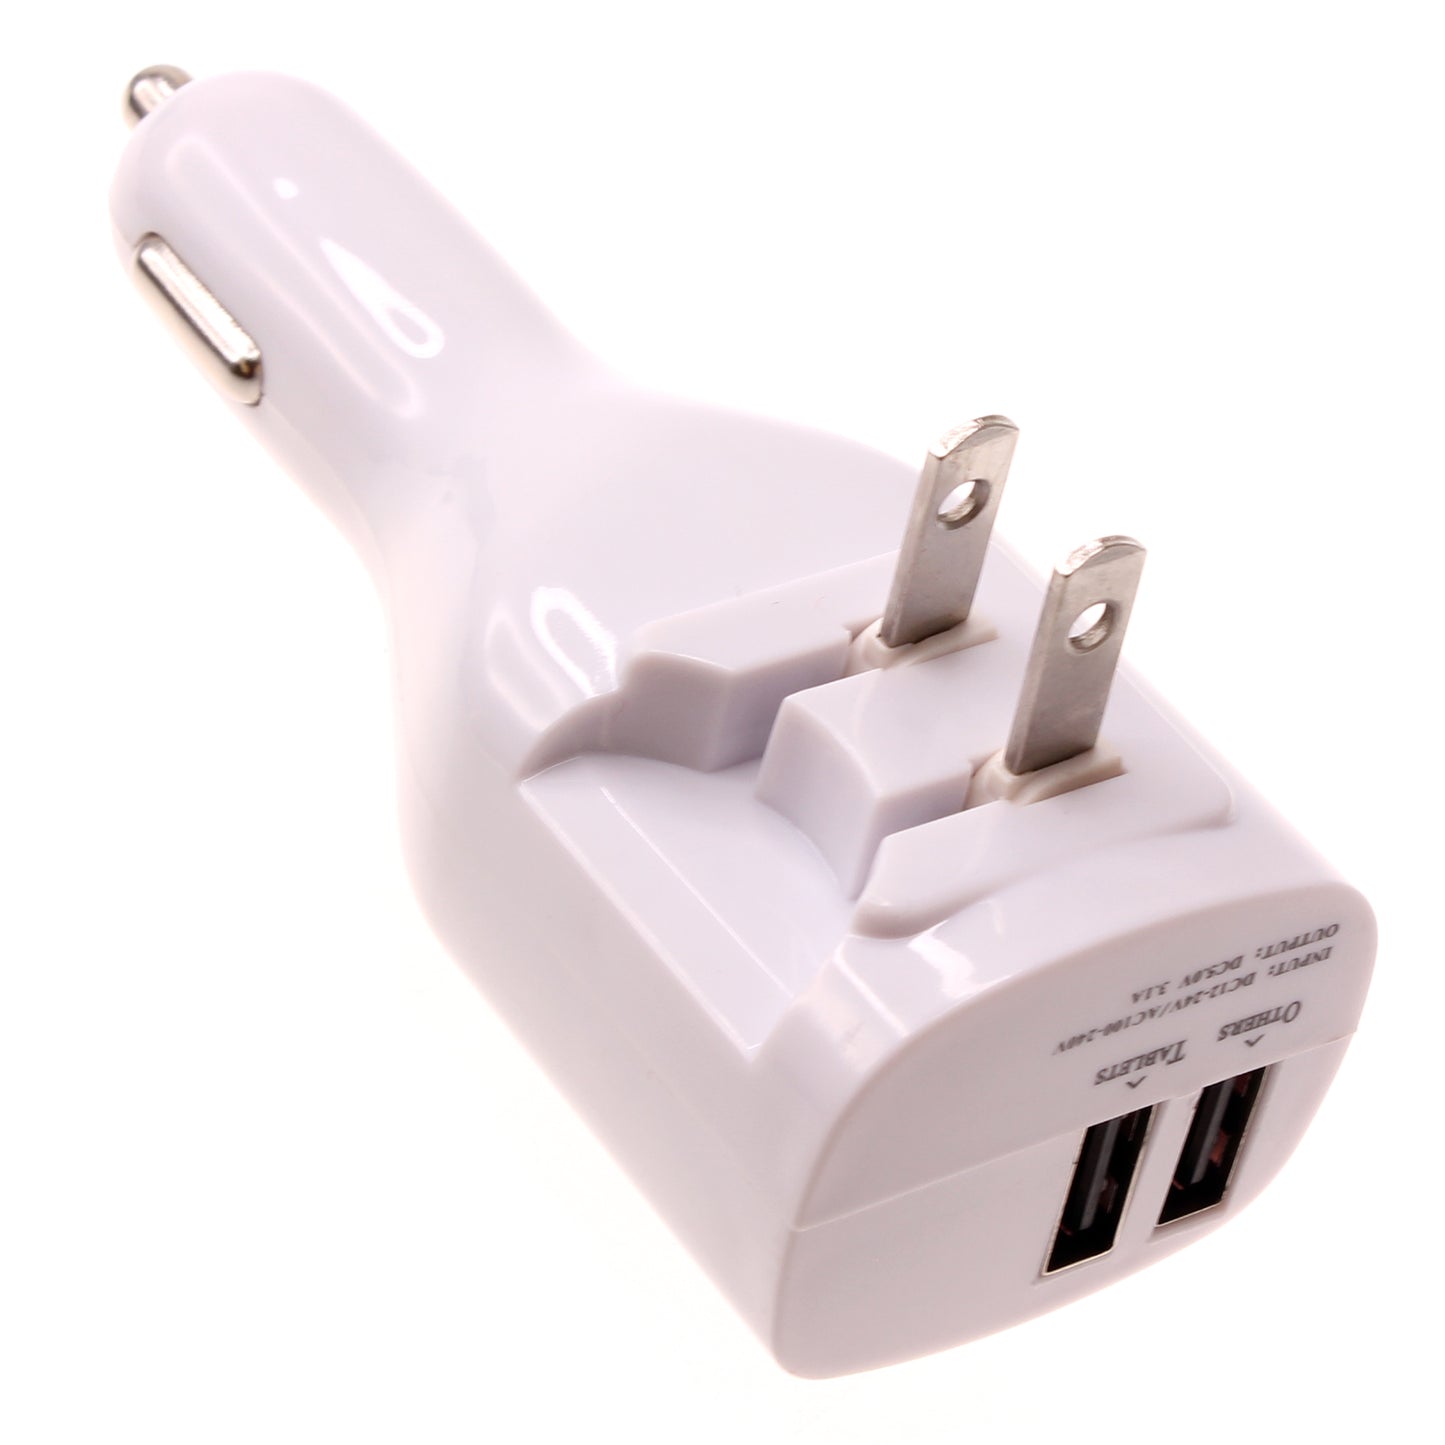 2-in-1 Car Home Charger, Folding Prongs Charging Wire Travel Power Adapter TYPE-C Cord 6ft Long USB-C Cable - NWY12